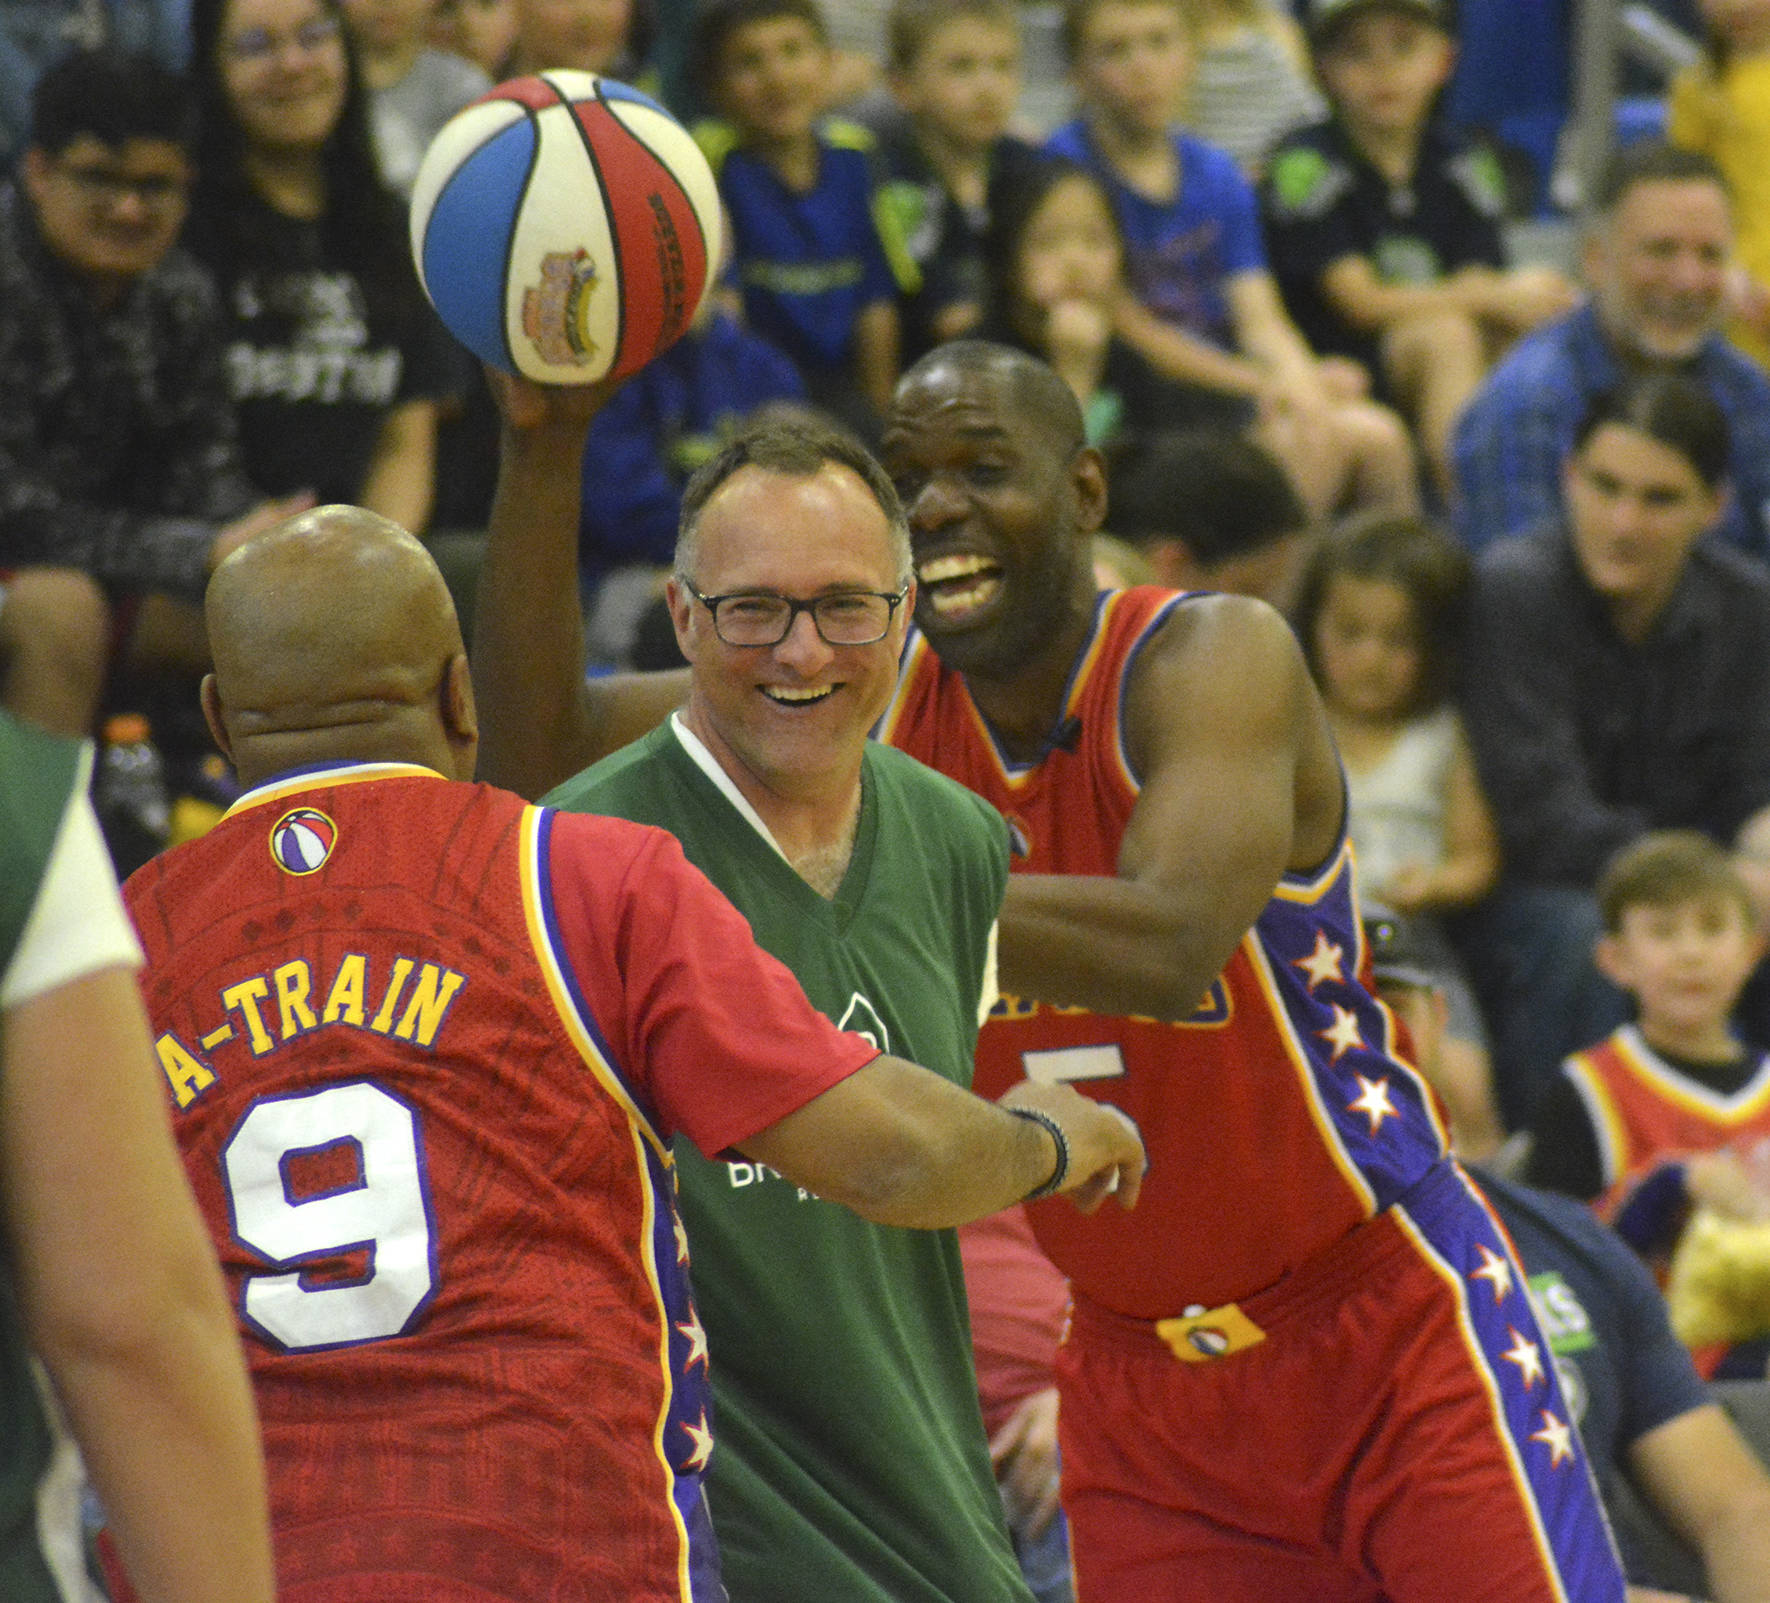 Two Harlem Wizards play keep away with the ball from one of the Tahoma staff members during the fundraising event that took place on May 3 at Tahoma High School. Photo by Kayse Angel